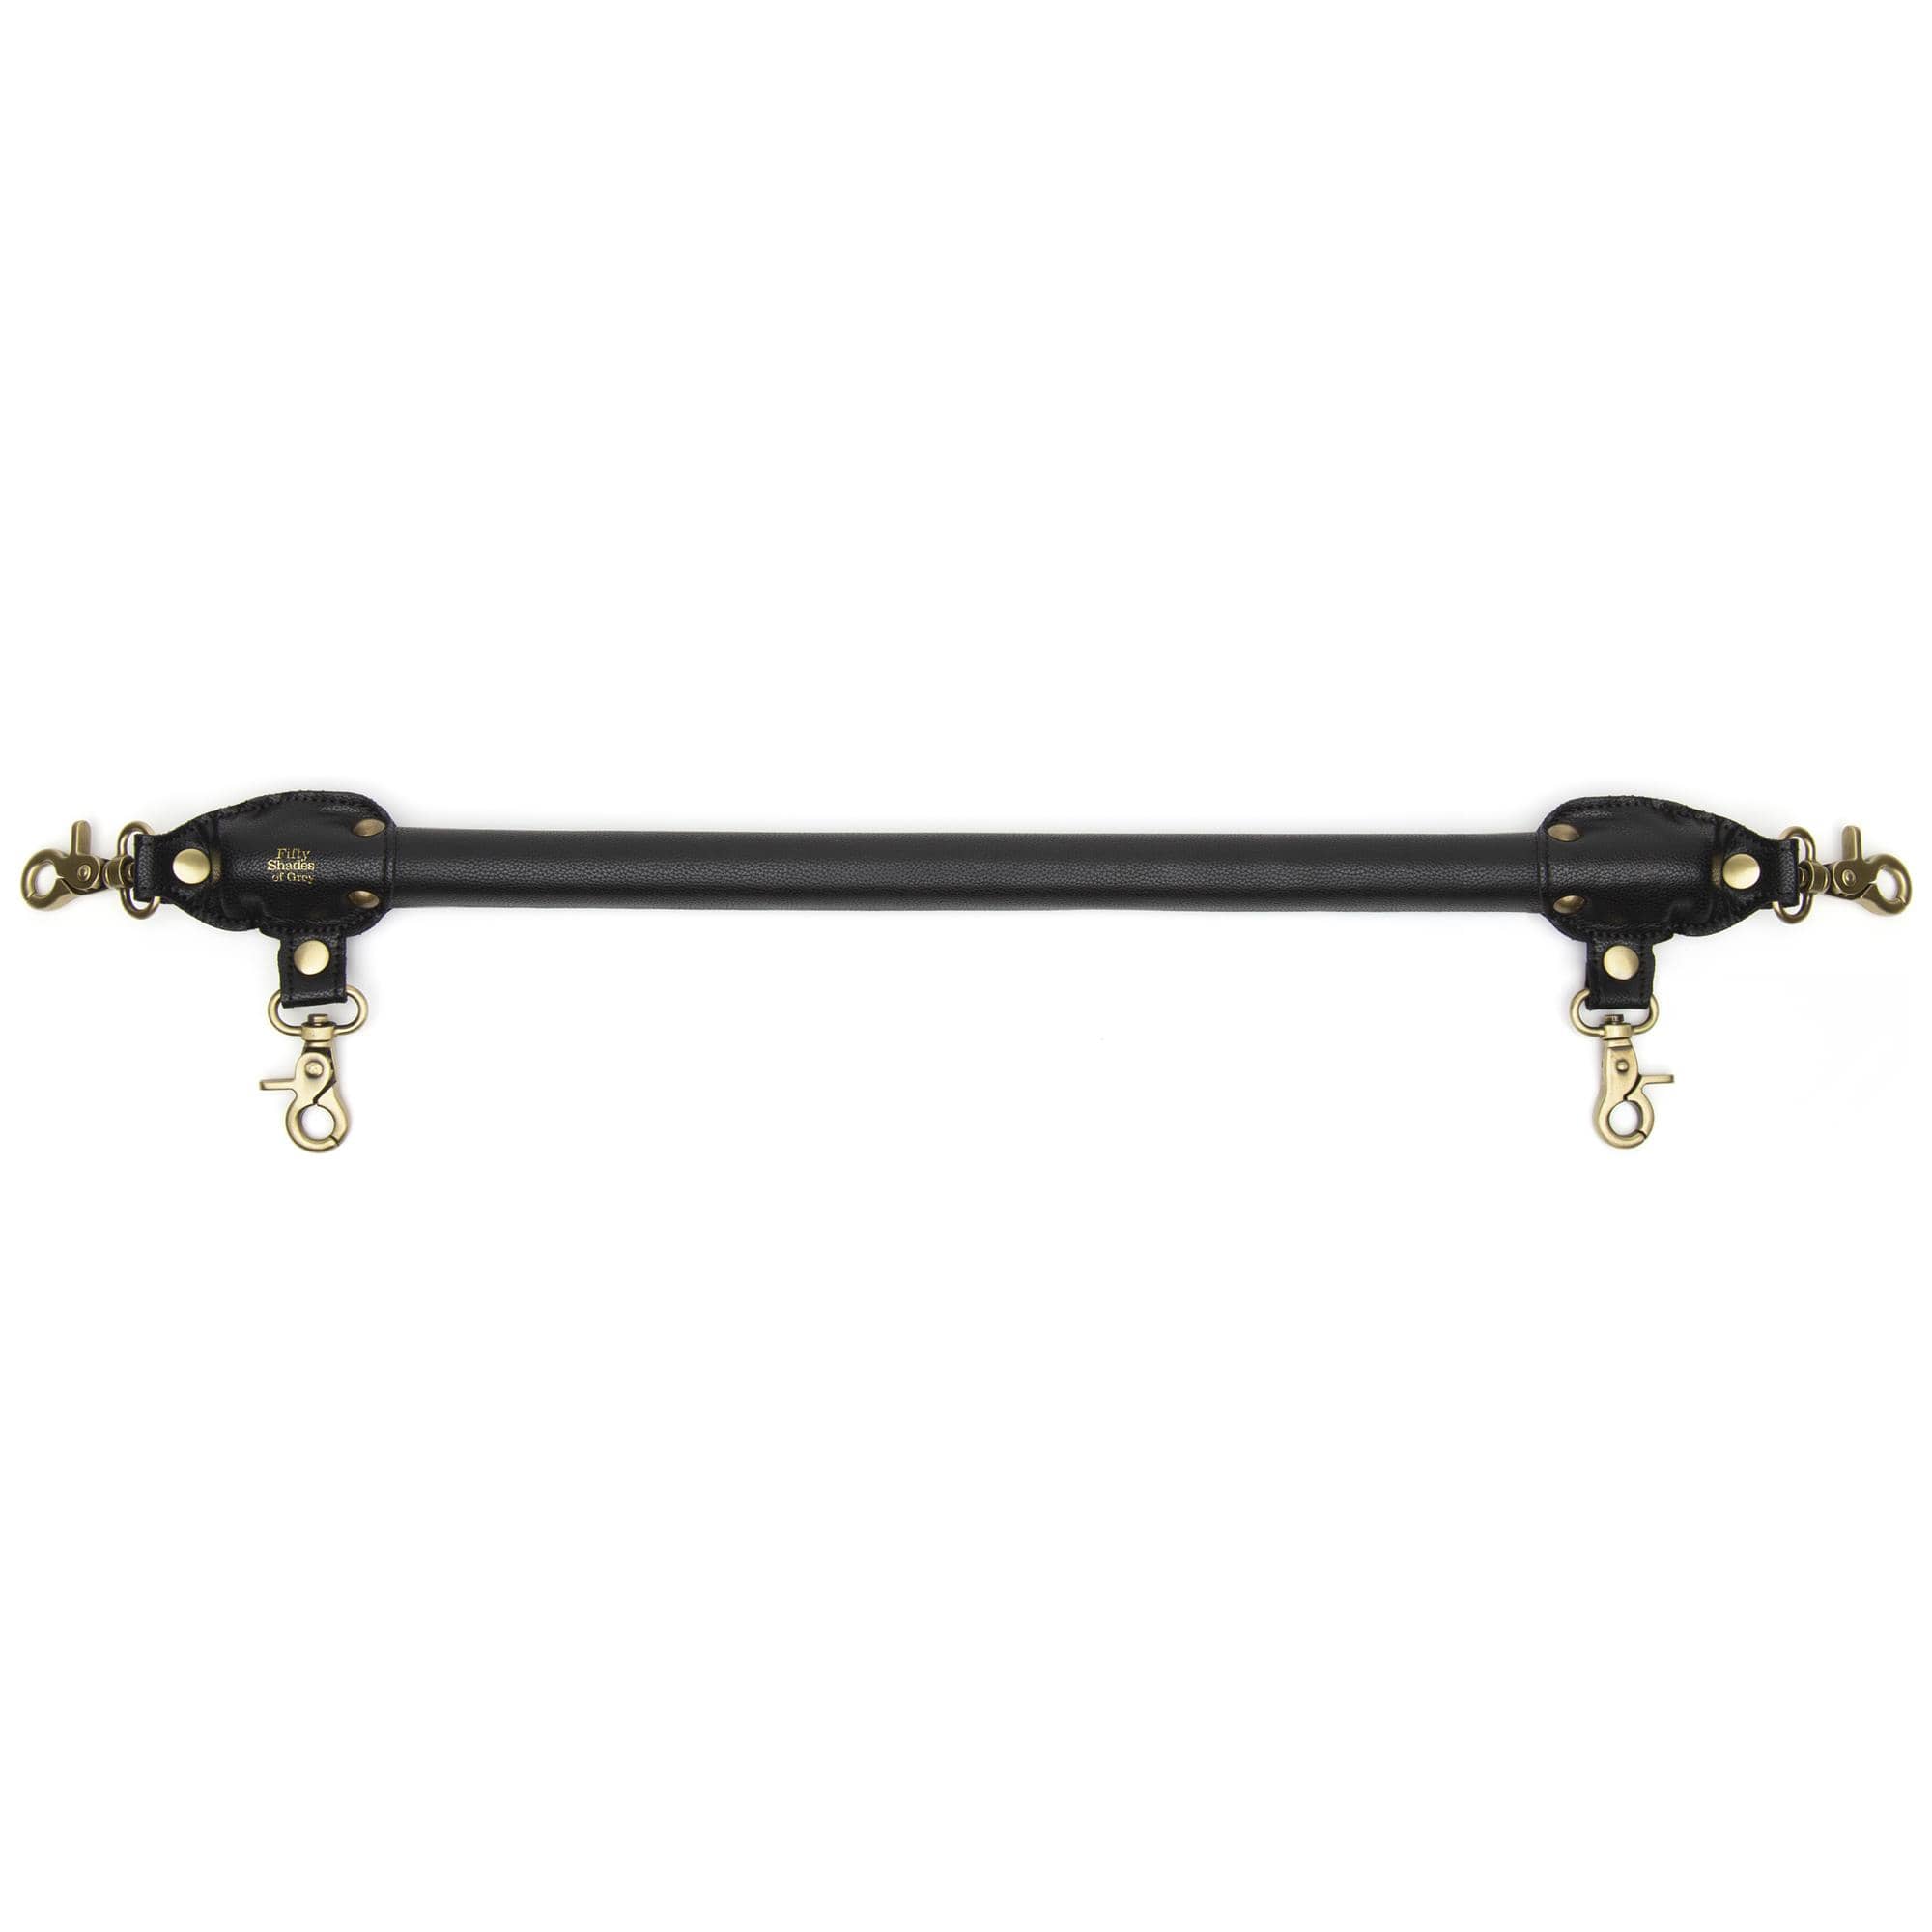 50 Shades of Grey -Bound to You Spreader Bar